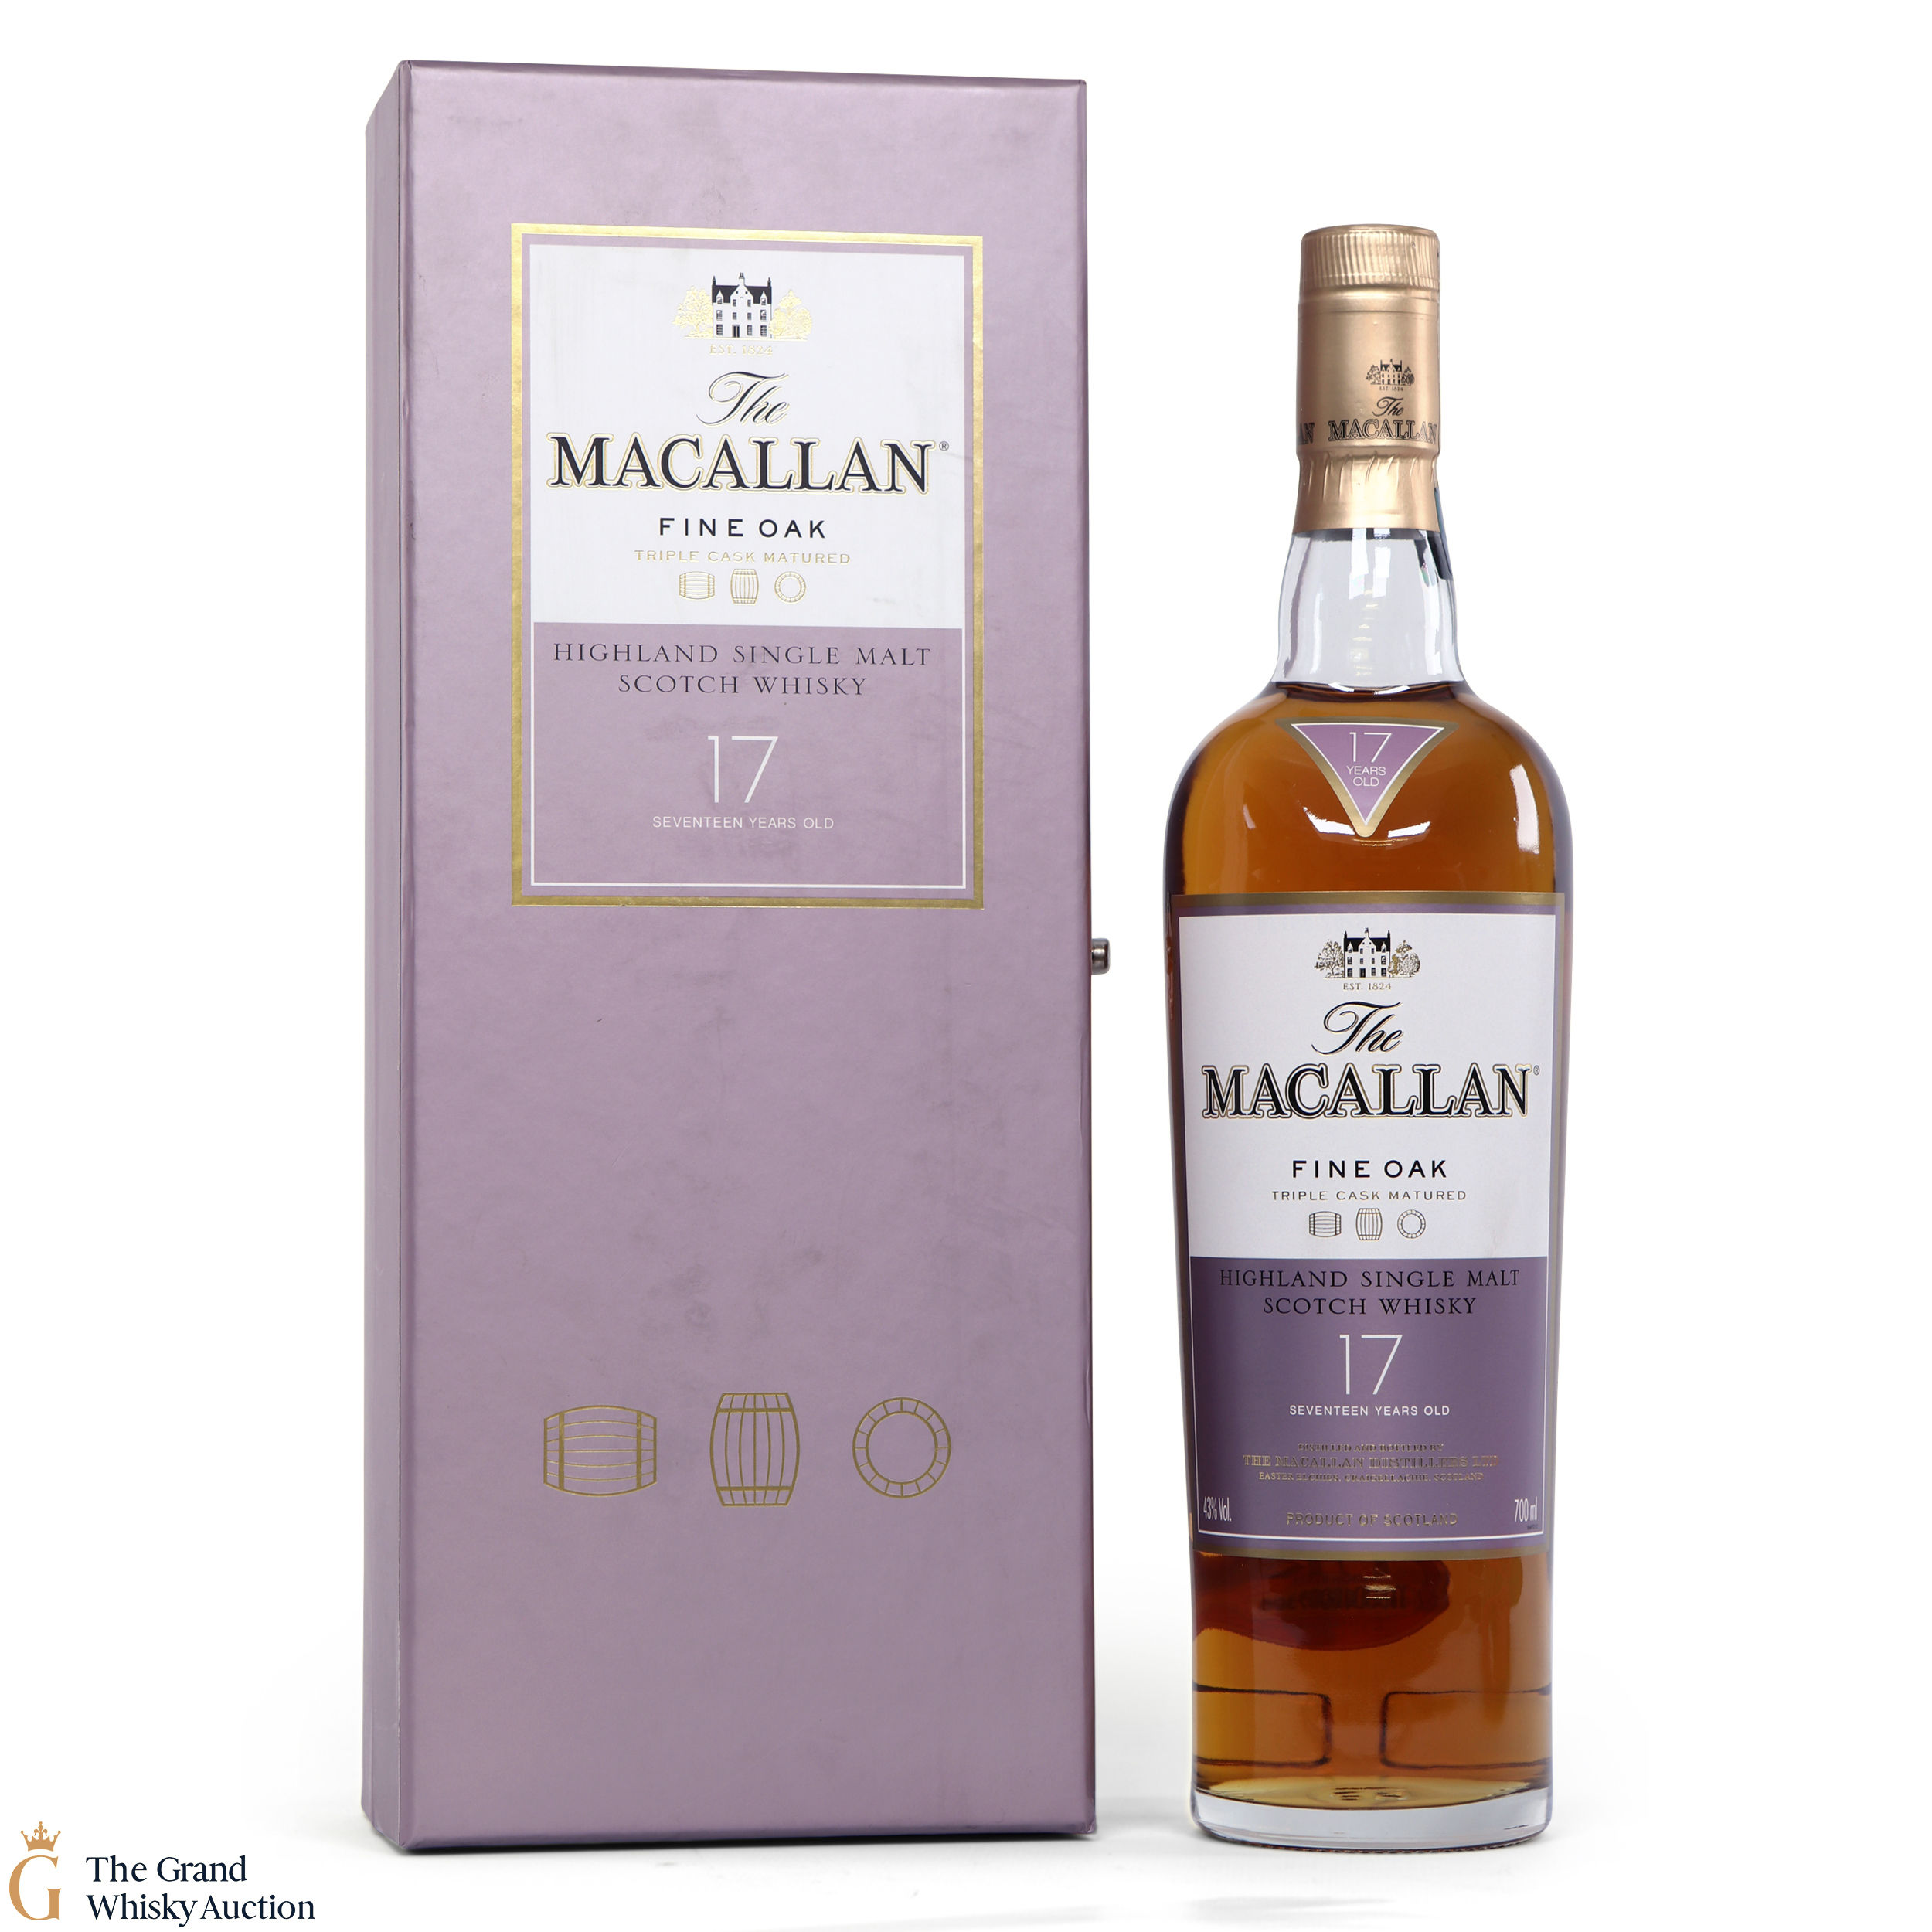 Macallan 17 Year Old Fine Oak Auction The Grand Whisky Auction